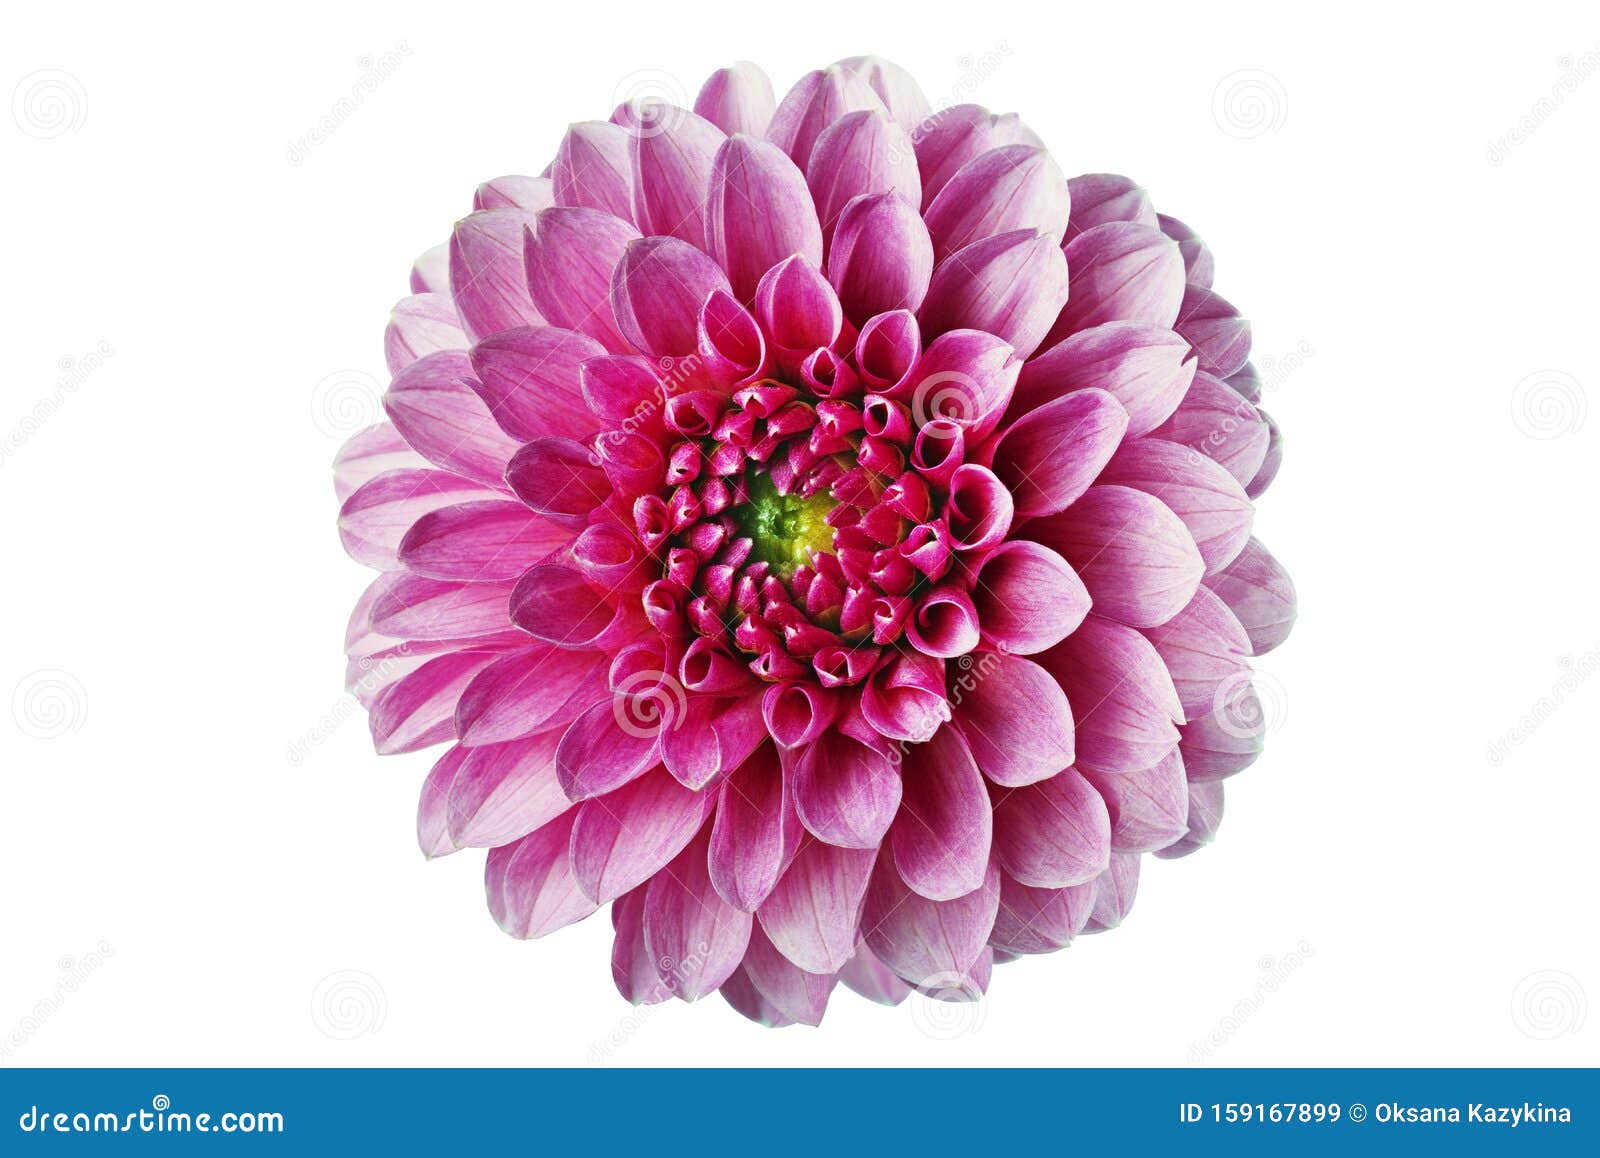 Flower White Background Images - Download 1,741,436 Royalty Free Photos